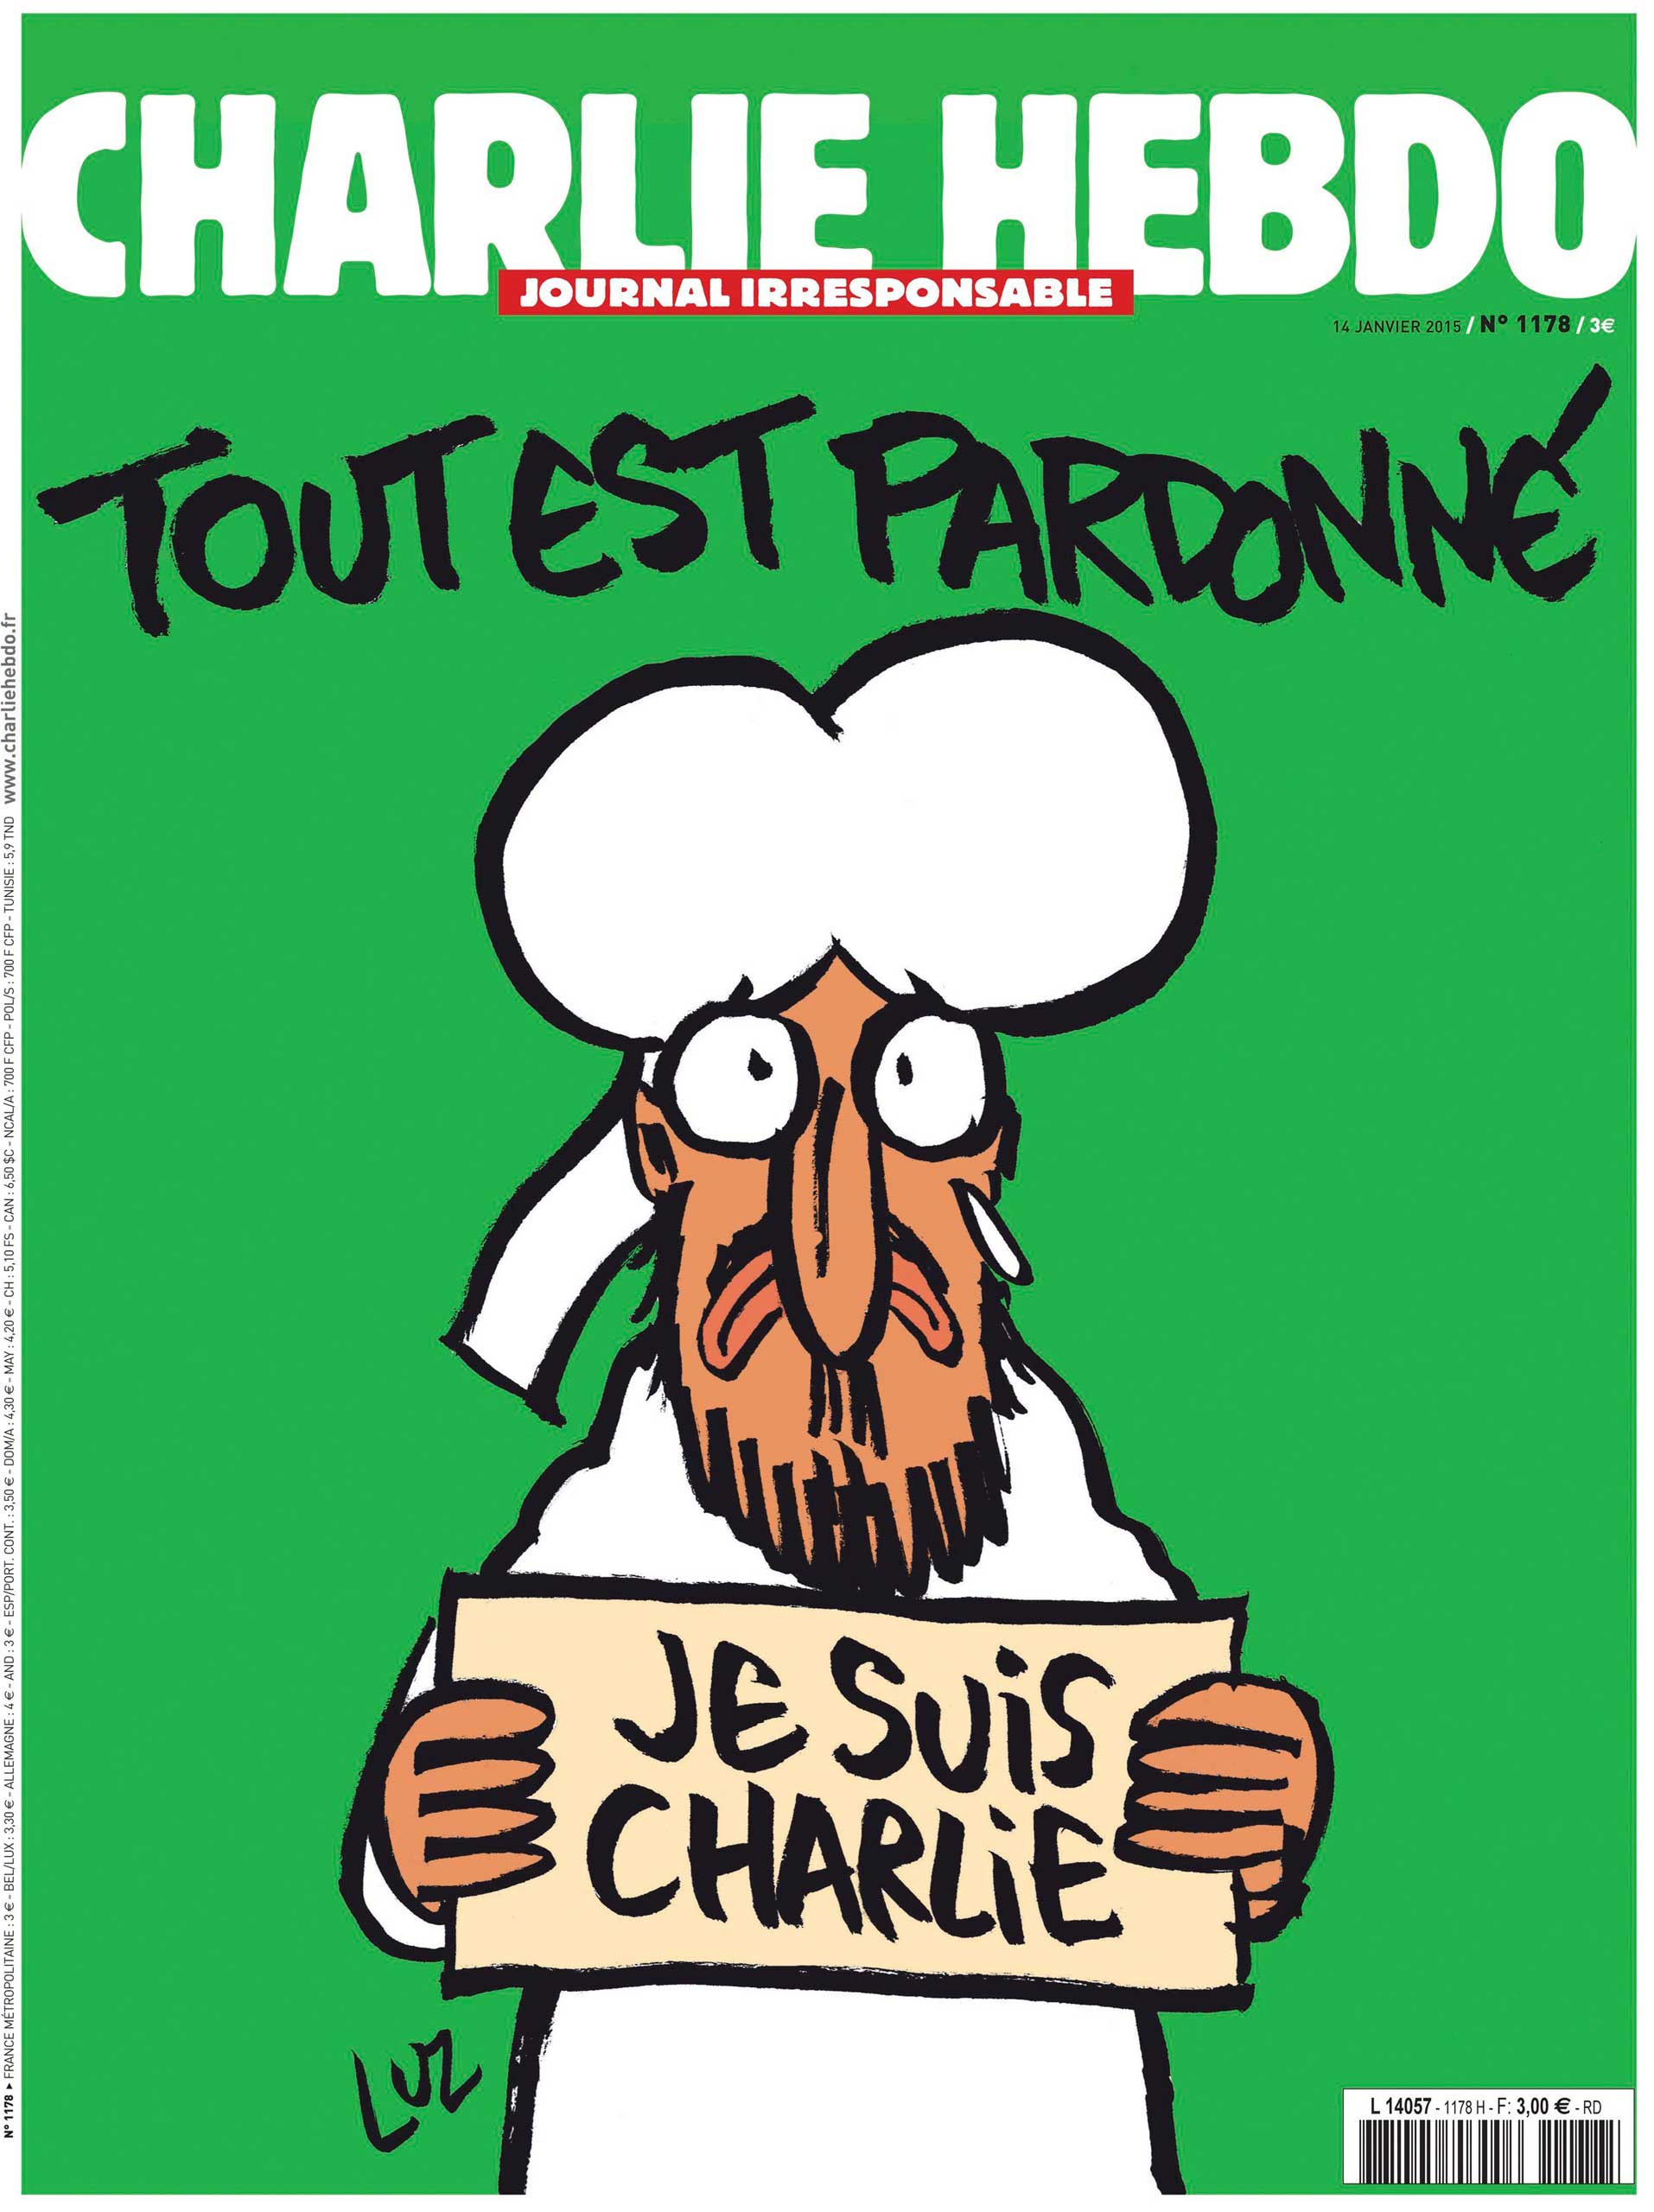 The new cover of satirical weekly Charlie Hebdo. (Reuters)